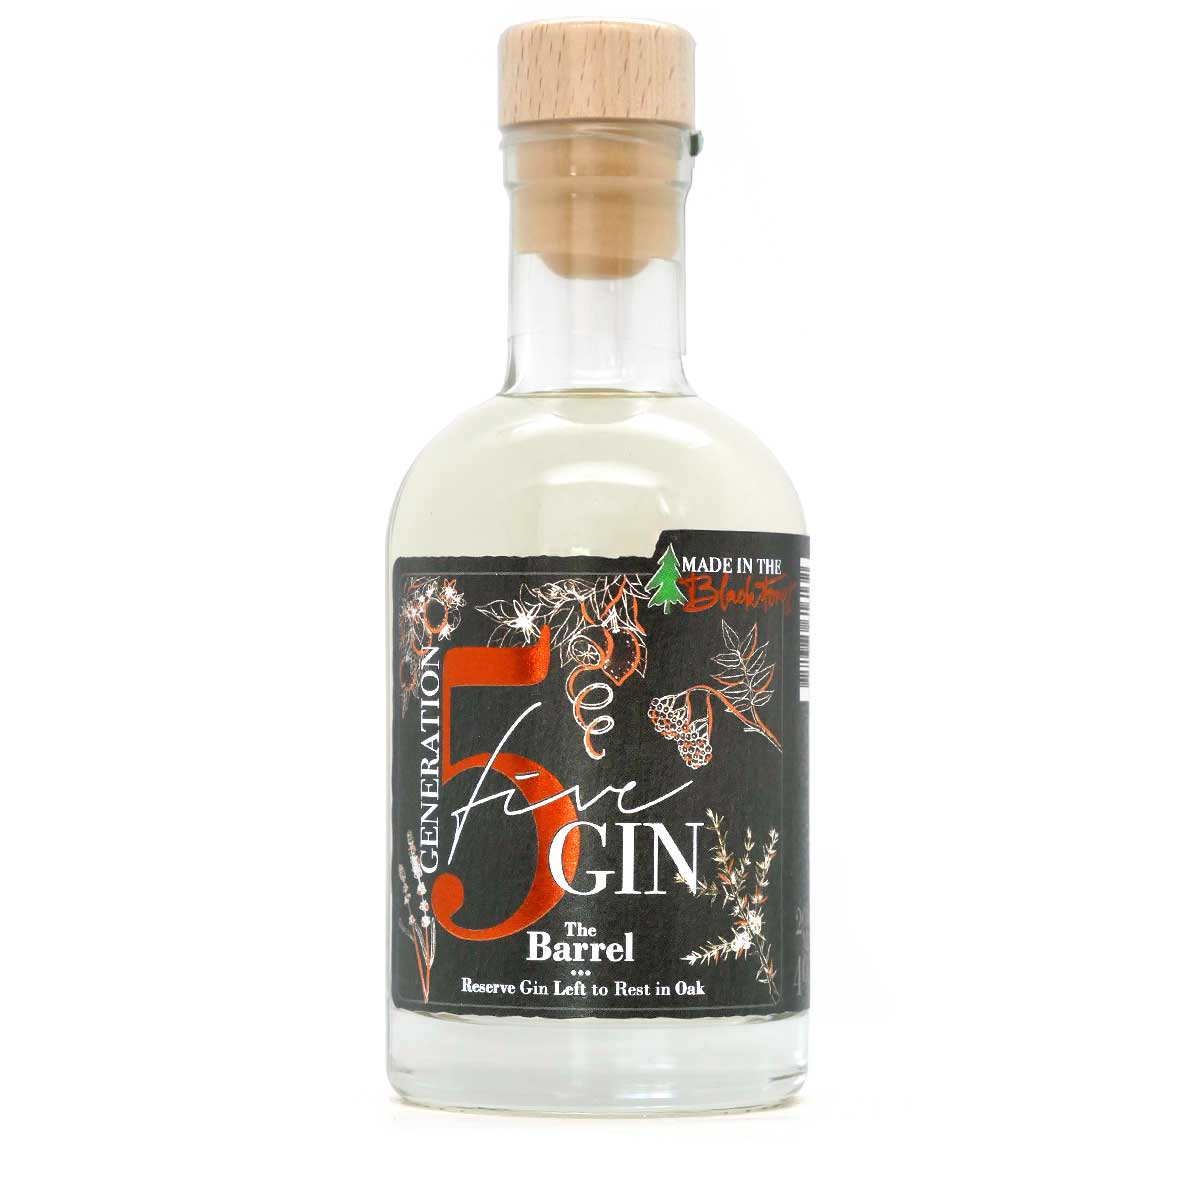 Generation 5 Gin PANAMA SELECT - Black Forest Gin